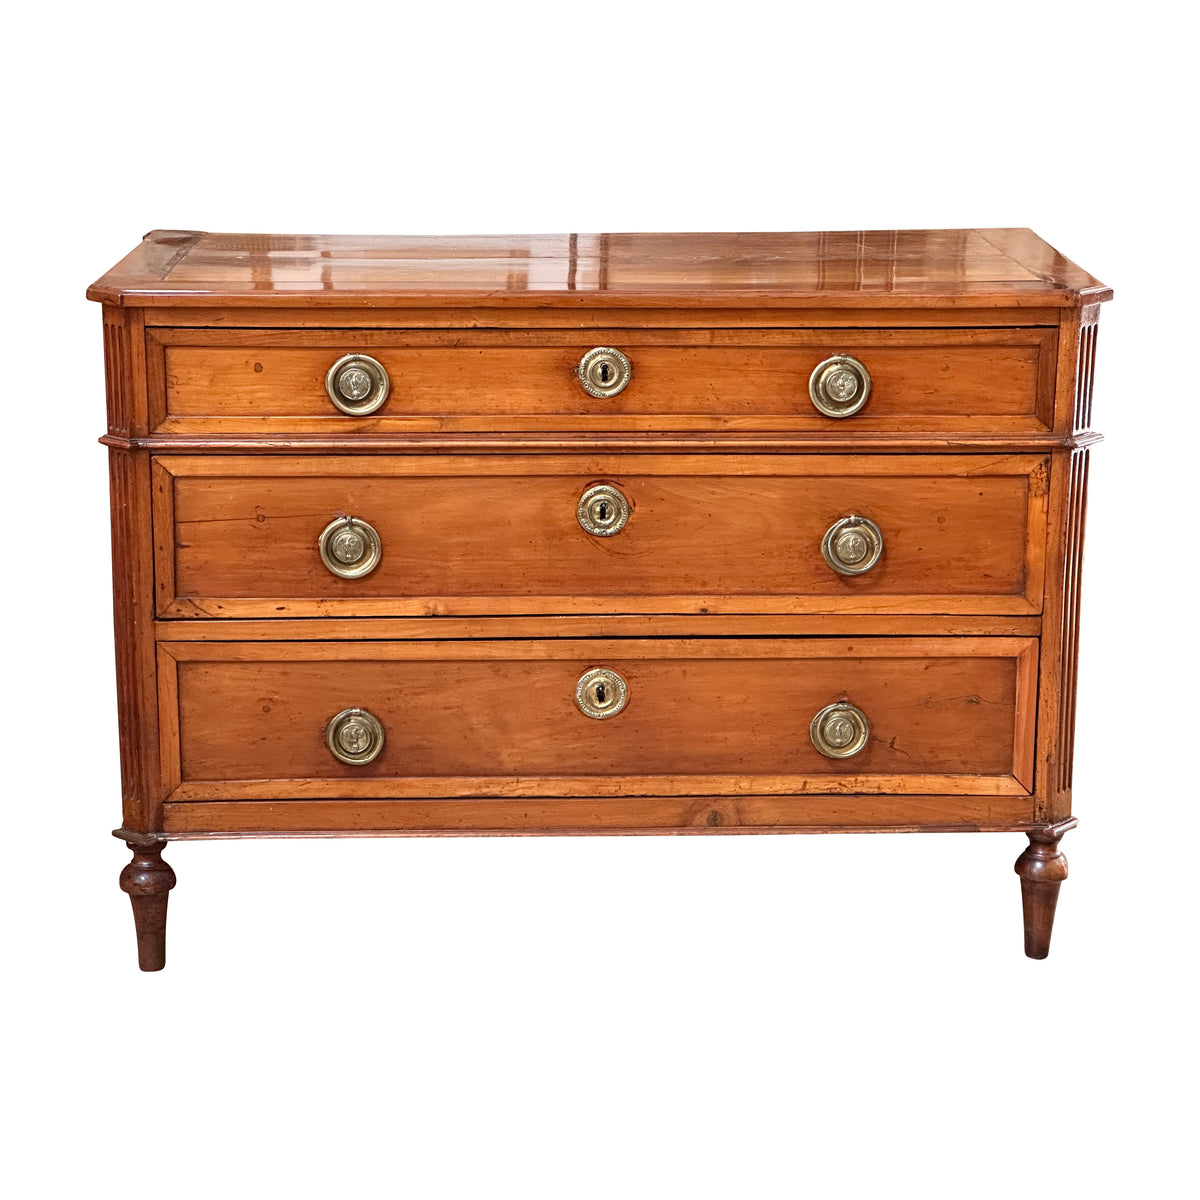 Walnut French Louis XVI Period  Directoire Commode, c. 1790-1800